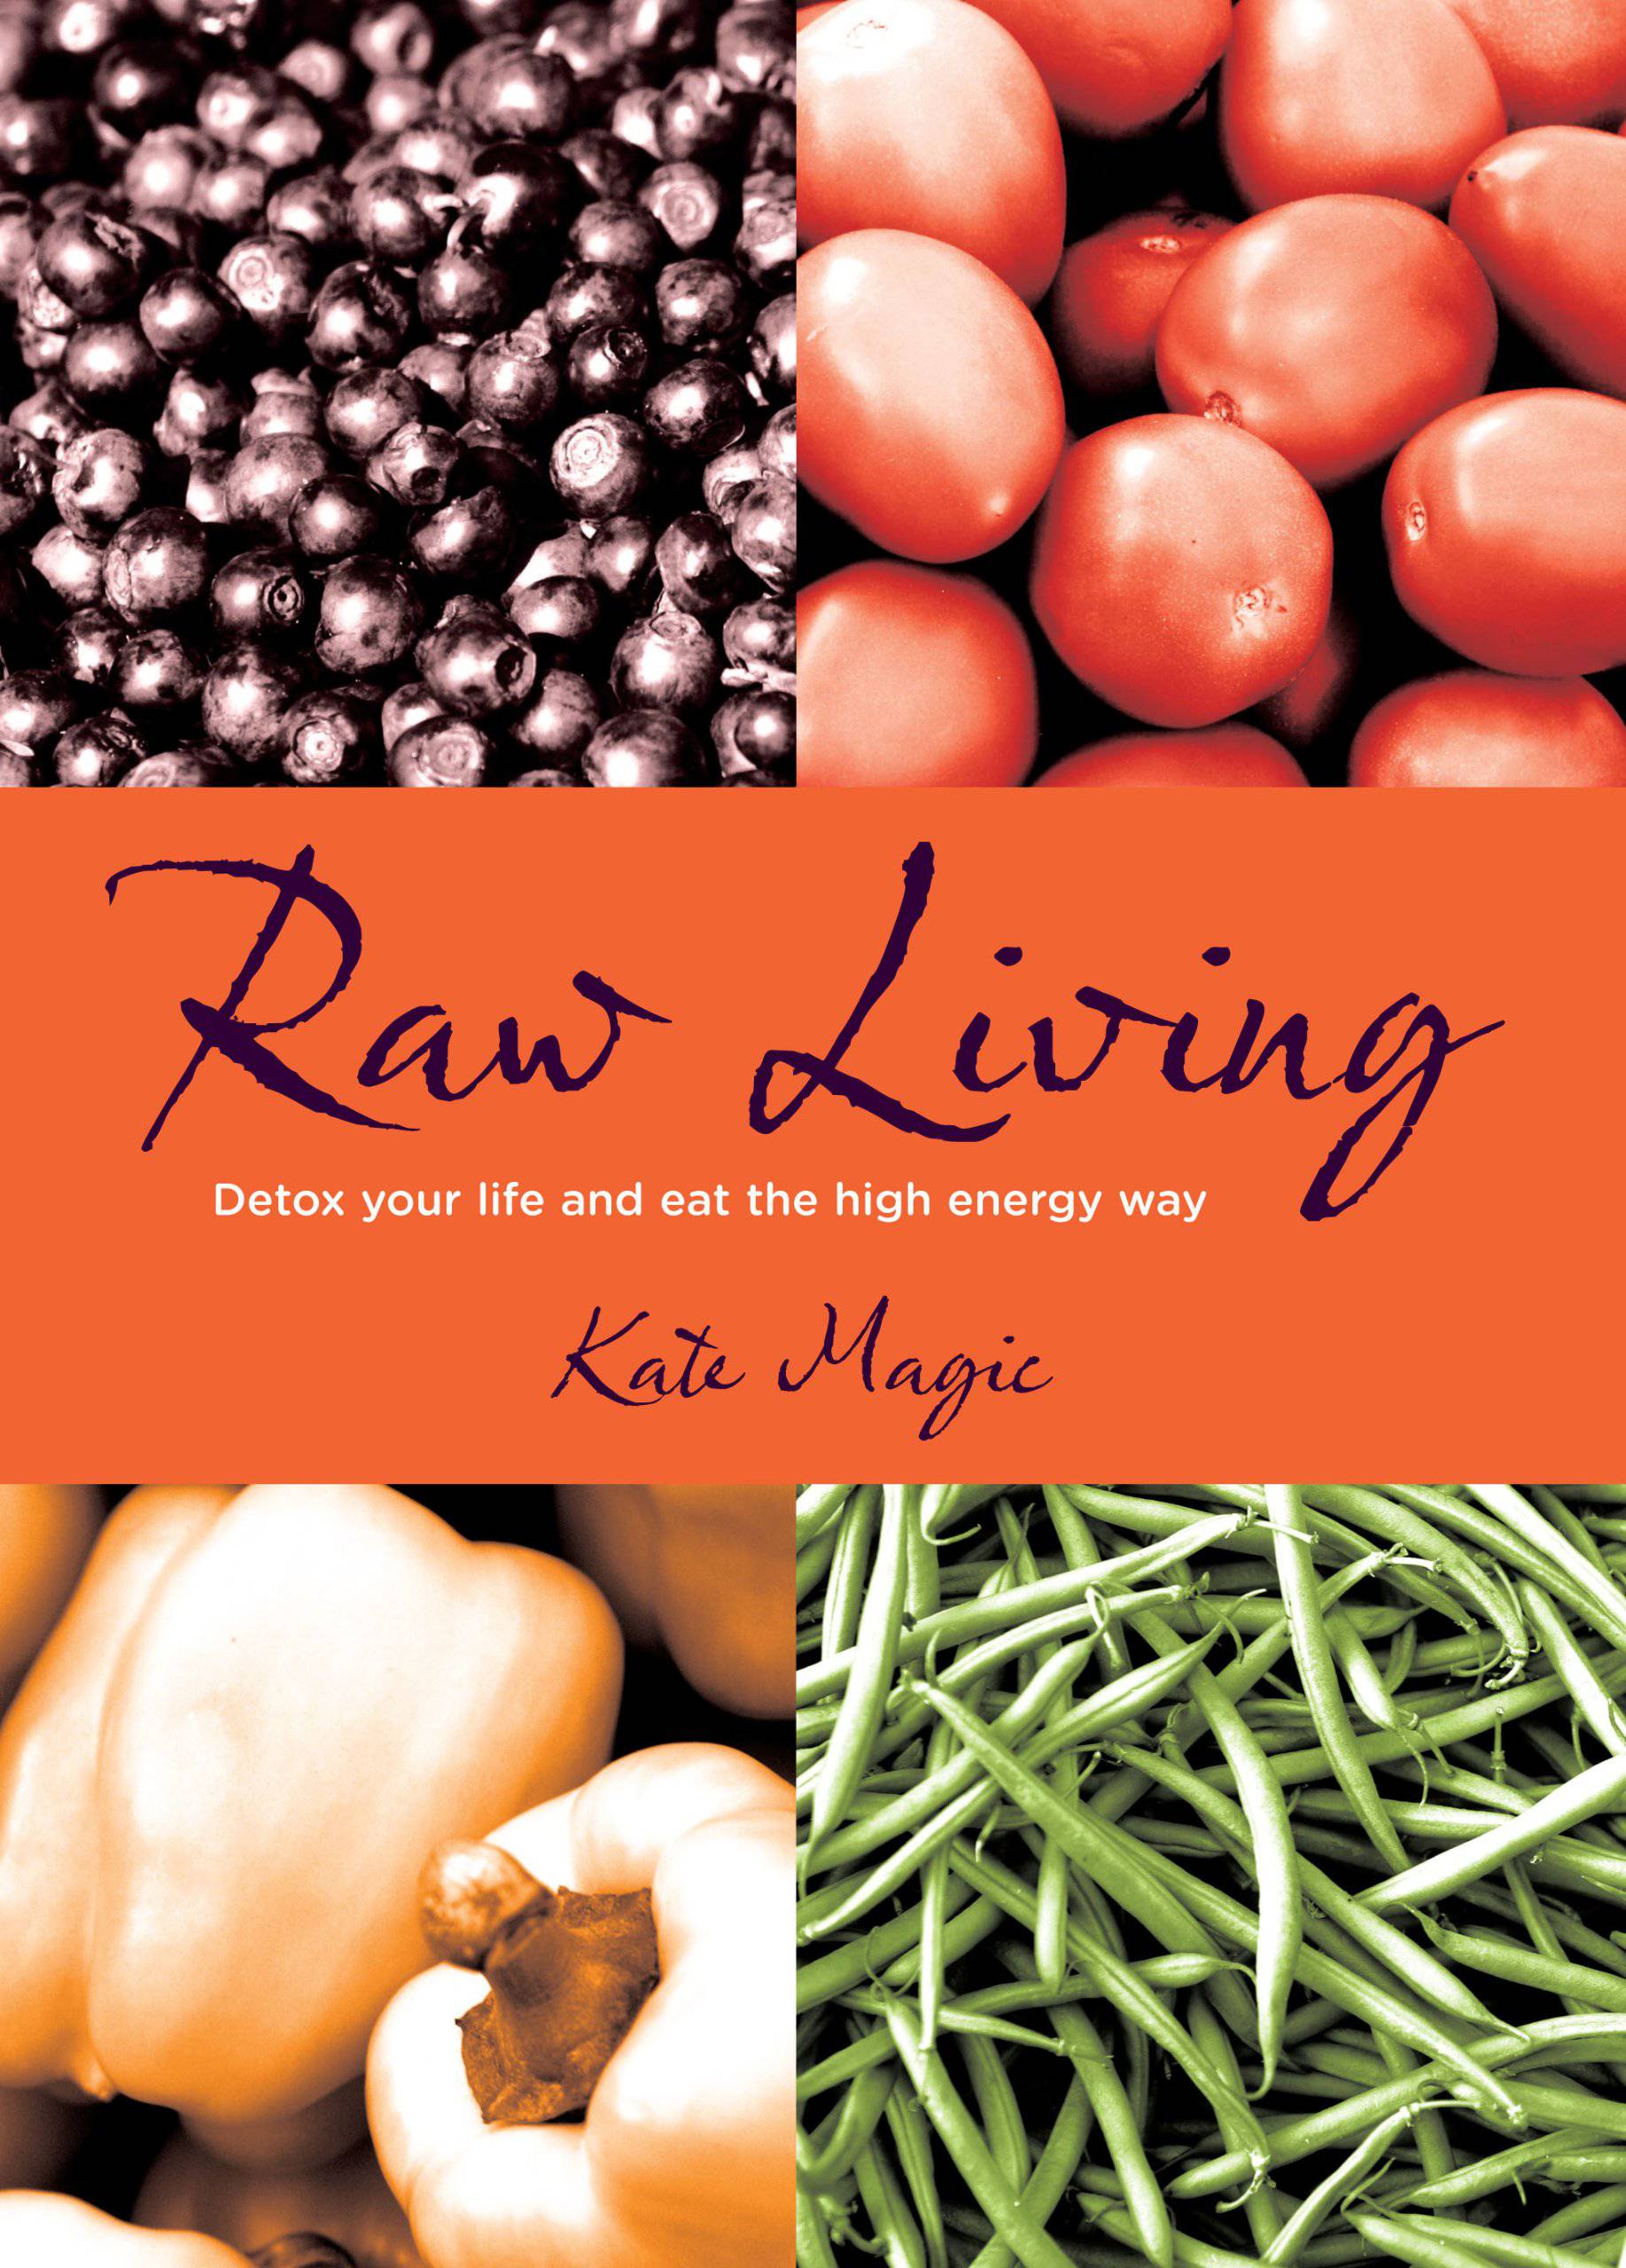 Raw living by Kate Magic